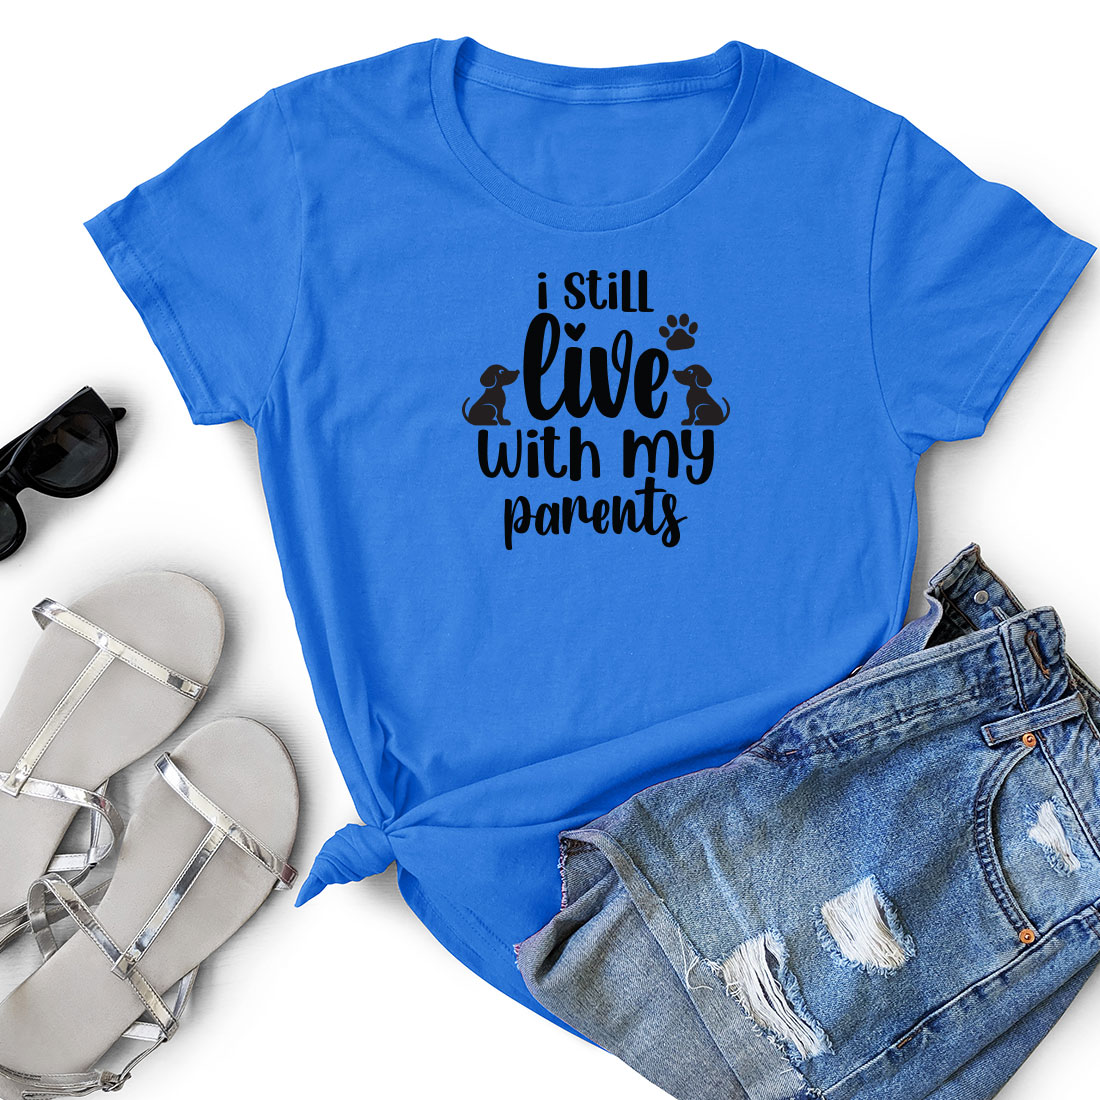 T - shirt that says i still live with my parents.